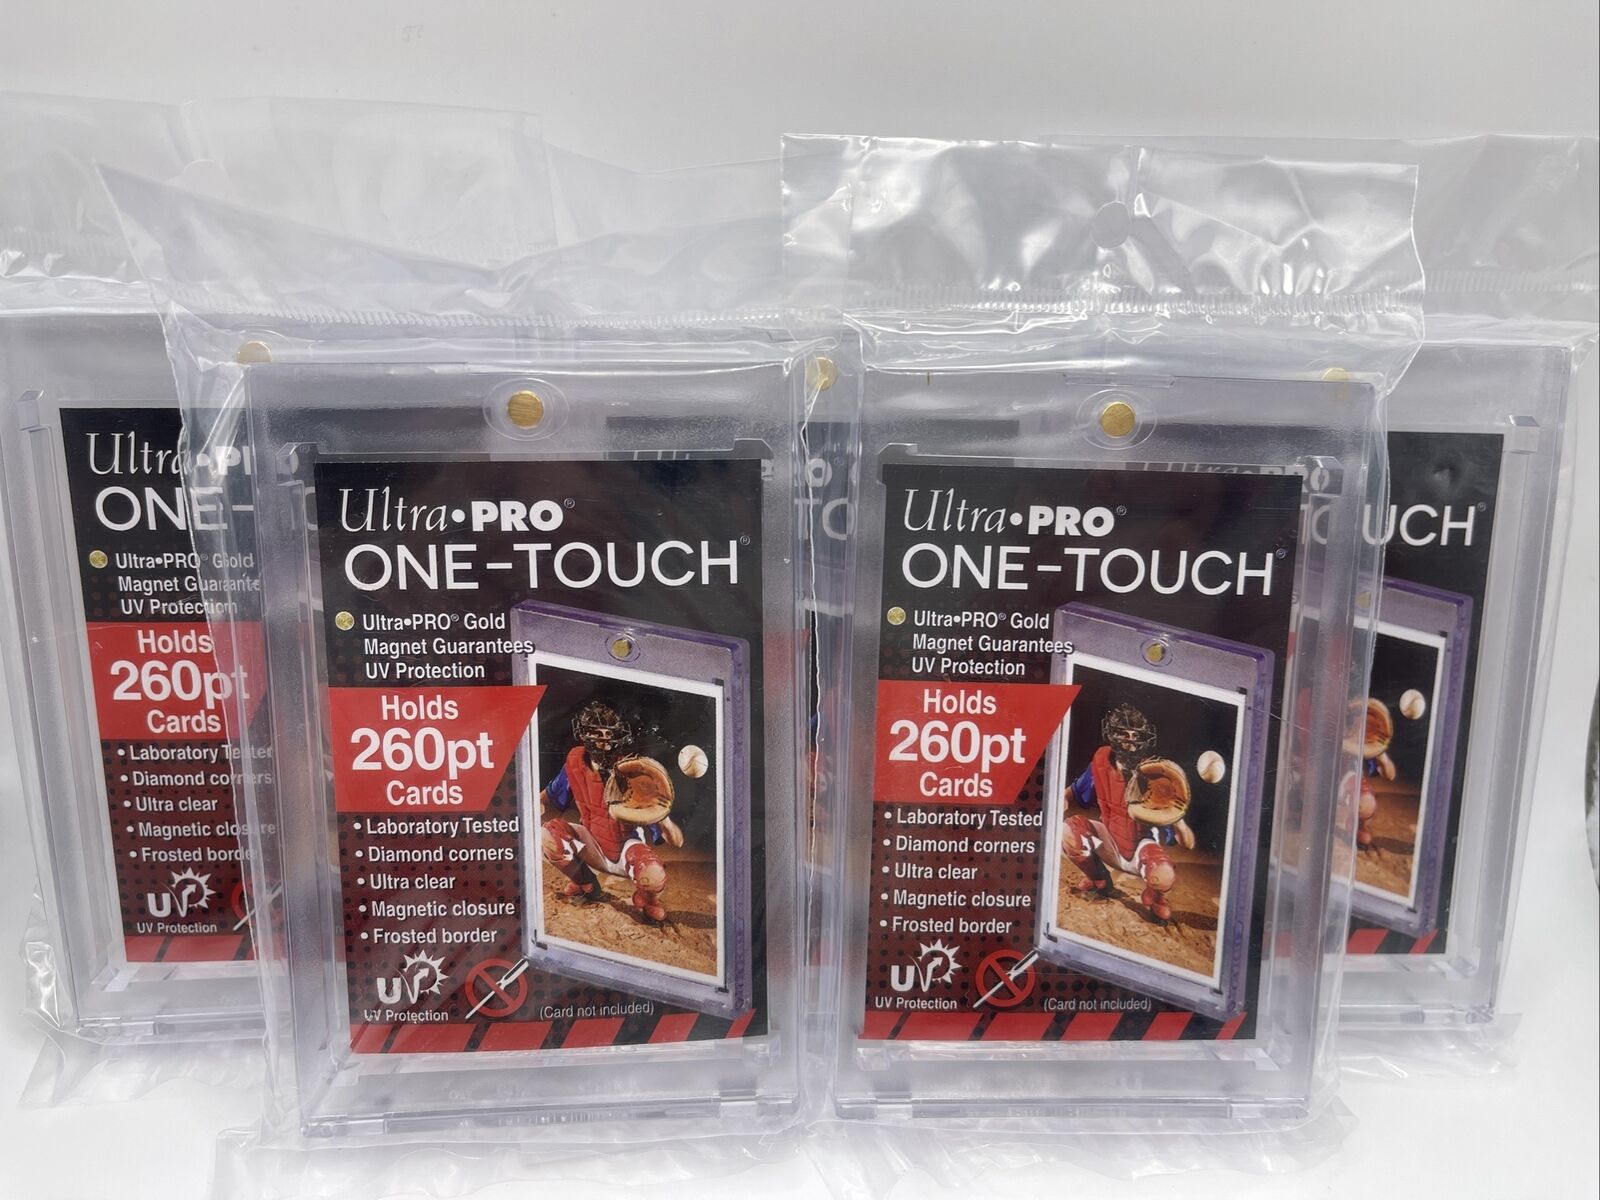 Ultra Pro One-Touch Thick Card 260pt Point Magnetic Card Holder, lot of 5